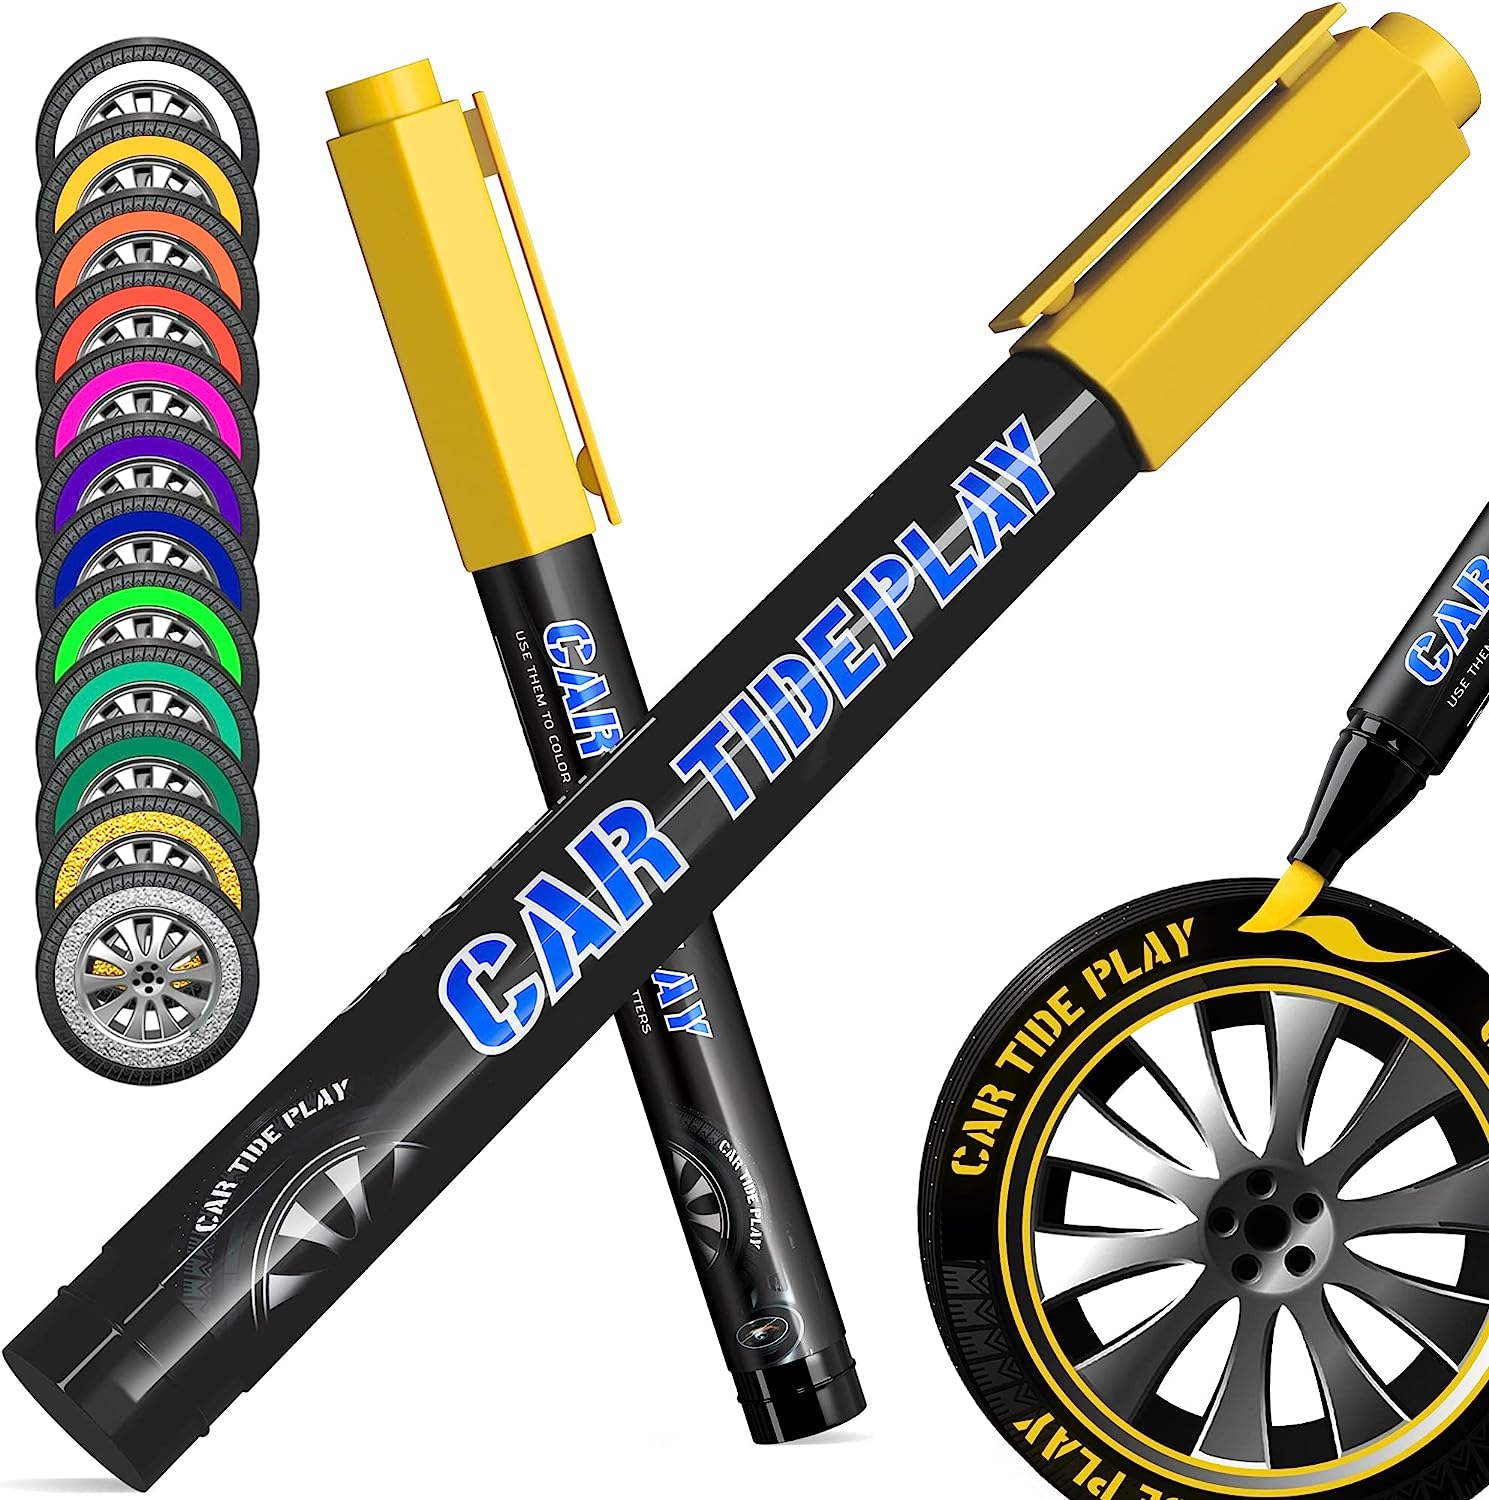 Cartideplay Paint Pen for Car Tires, Premium Tire [...]